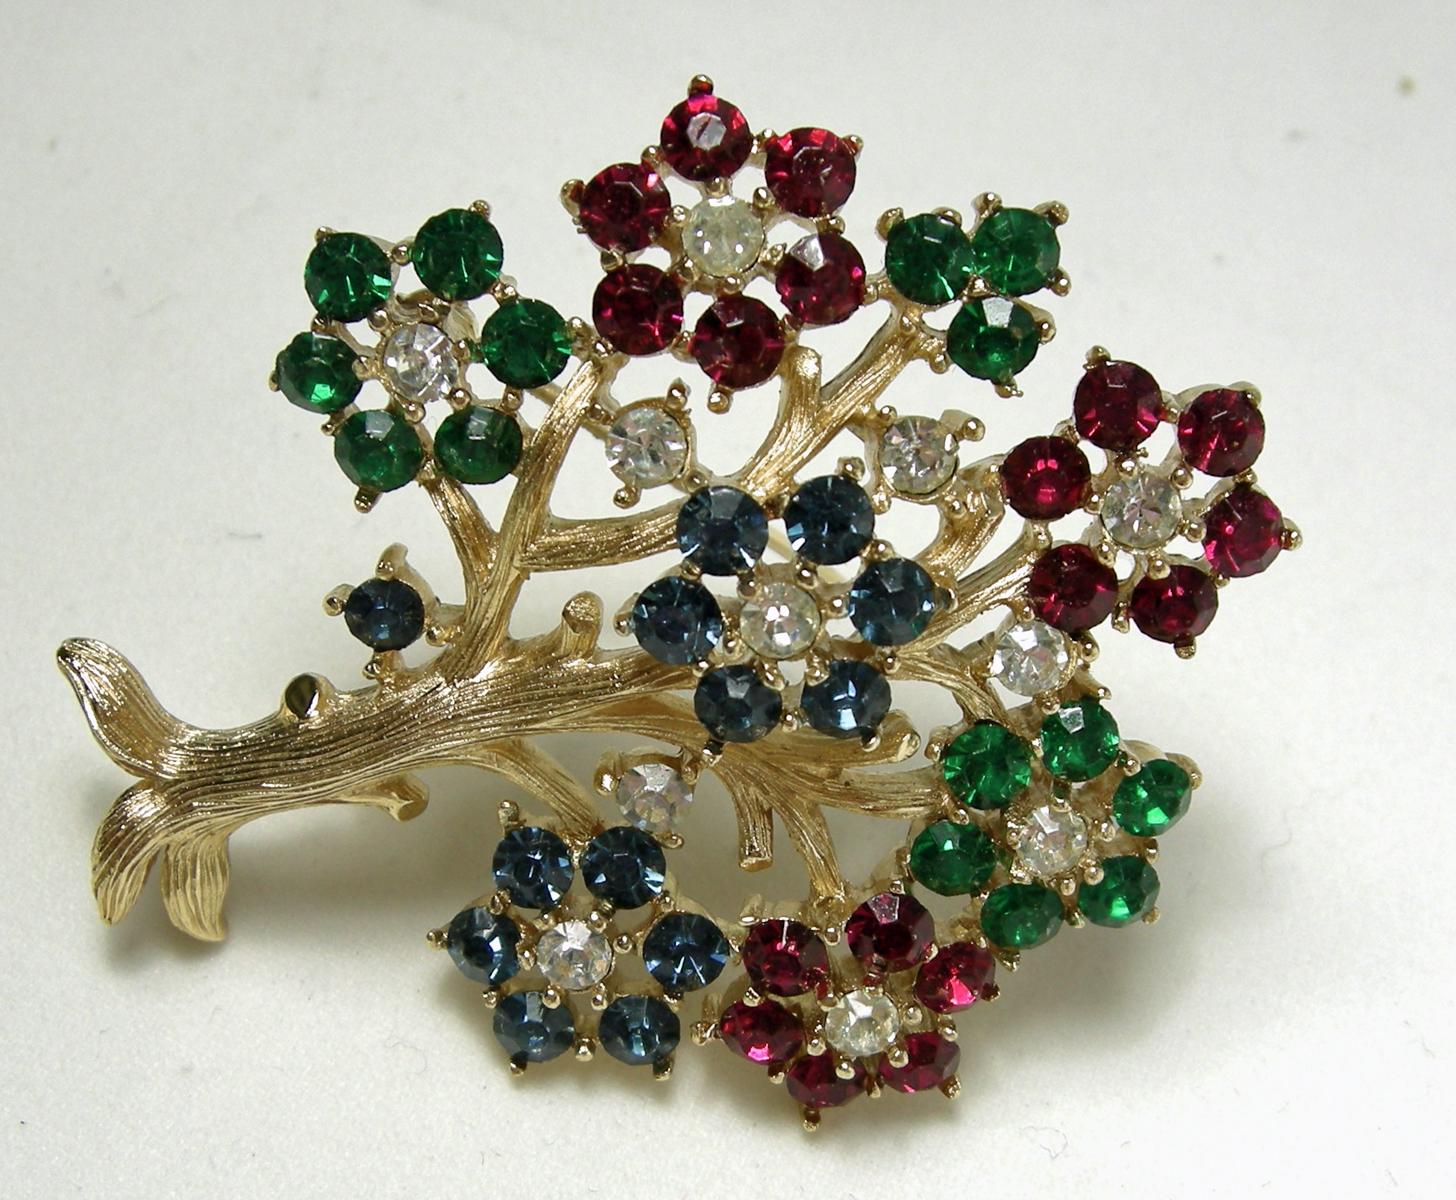 This is the famous Trifari “Tree of Life” brooch with red, green, blue and clear crystals in a gold tone setting.  In excellent condition, this brooch measures 2” x 1-7/8” and is signed with the crown “Trifari”.